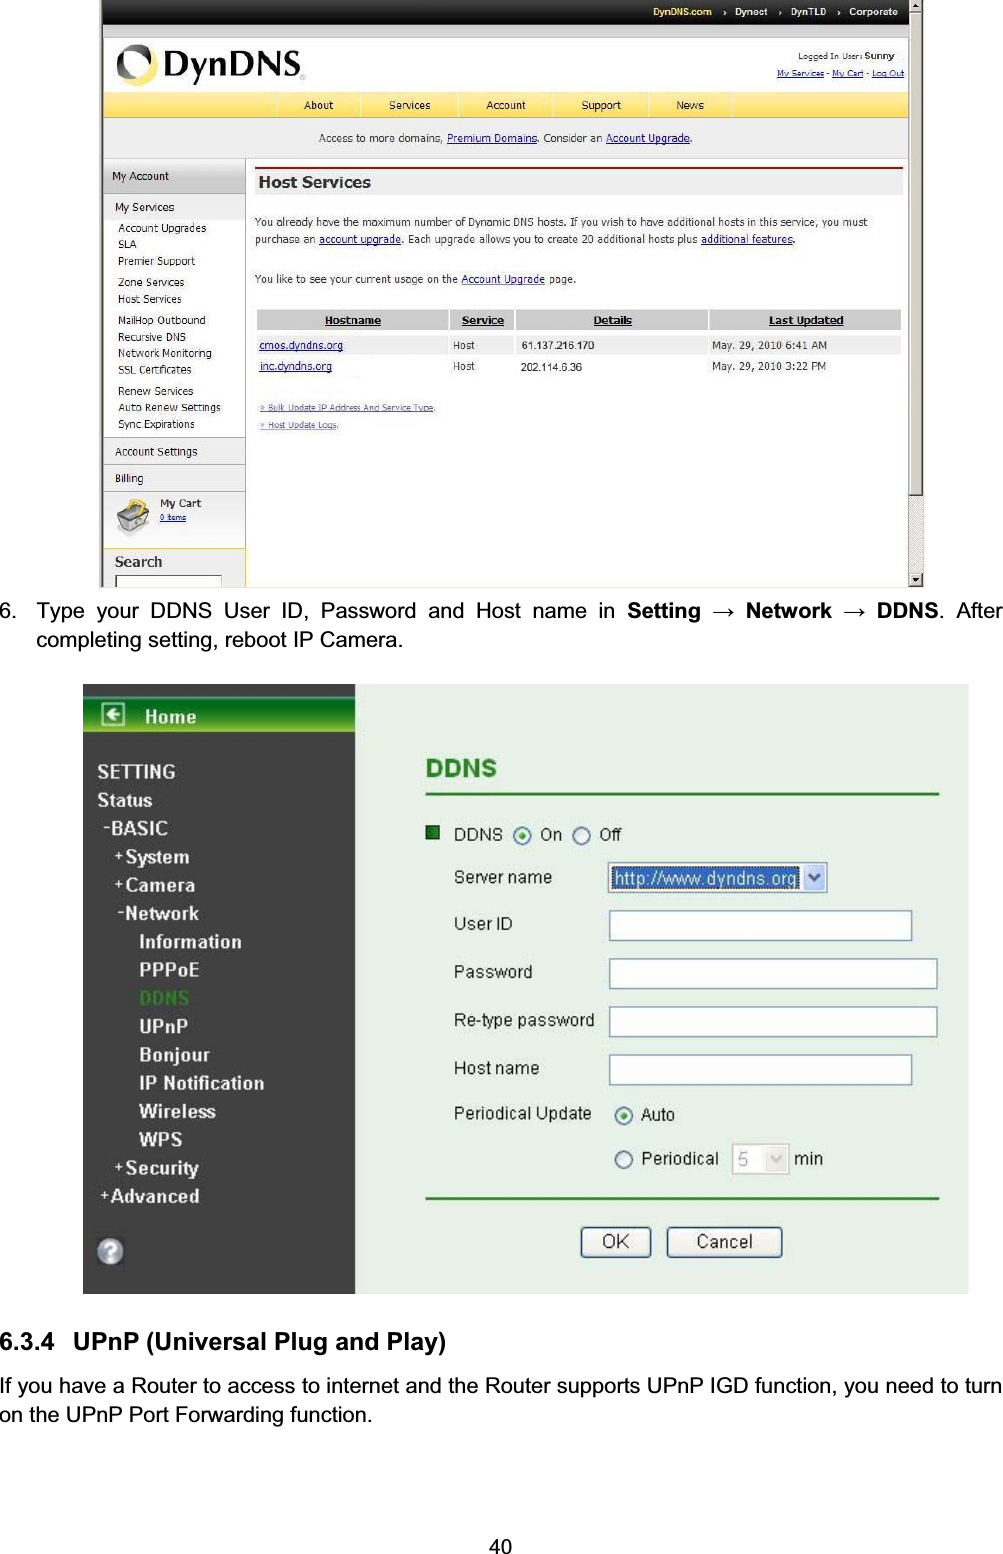   40 6.  Type your DDNS User ID, Password and Host name in Setting  Network  DDNS. After completing setting, reboot IP Camera.  6.3.4  UPnP (Universal Plug and Play)   If you have a Router to access to internet and the Router supports UPnP IGD function, you need to turn on the UPnP Port Forwarding function. 